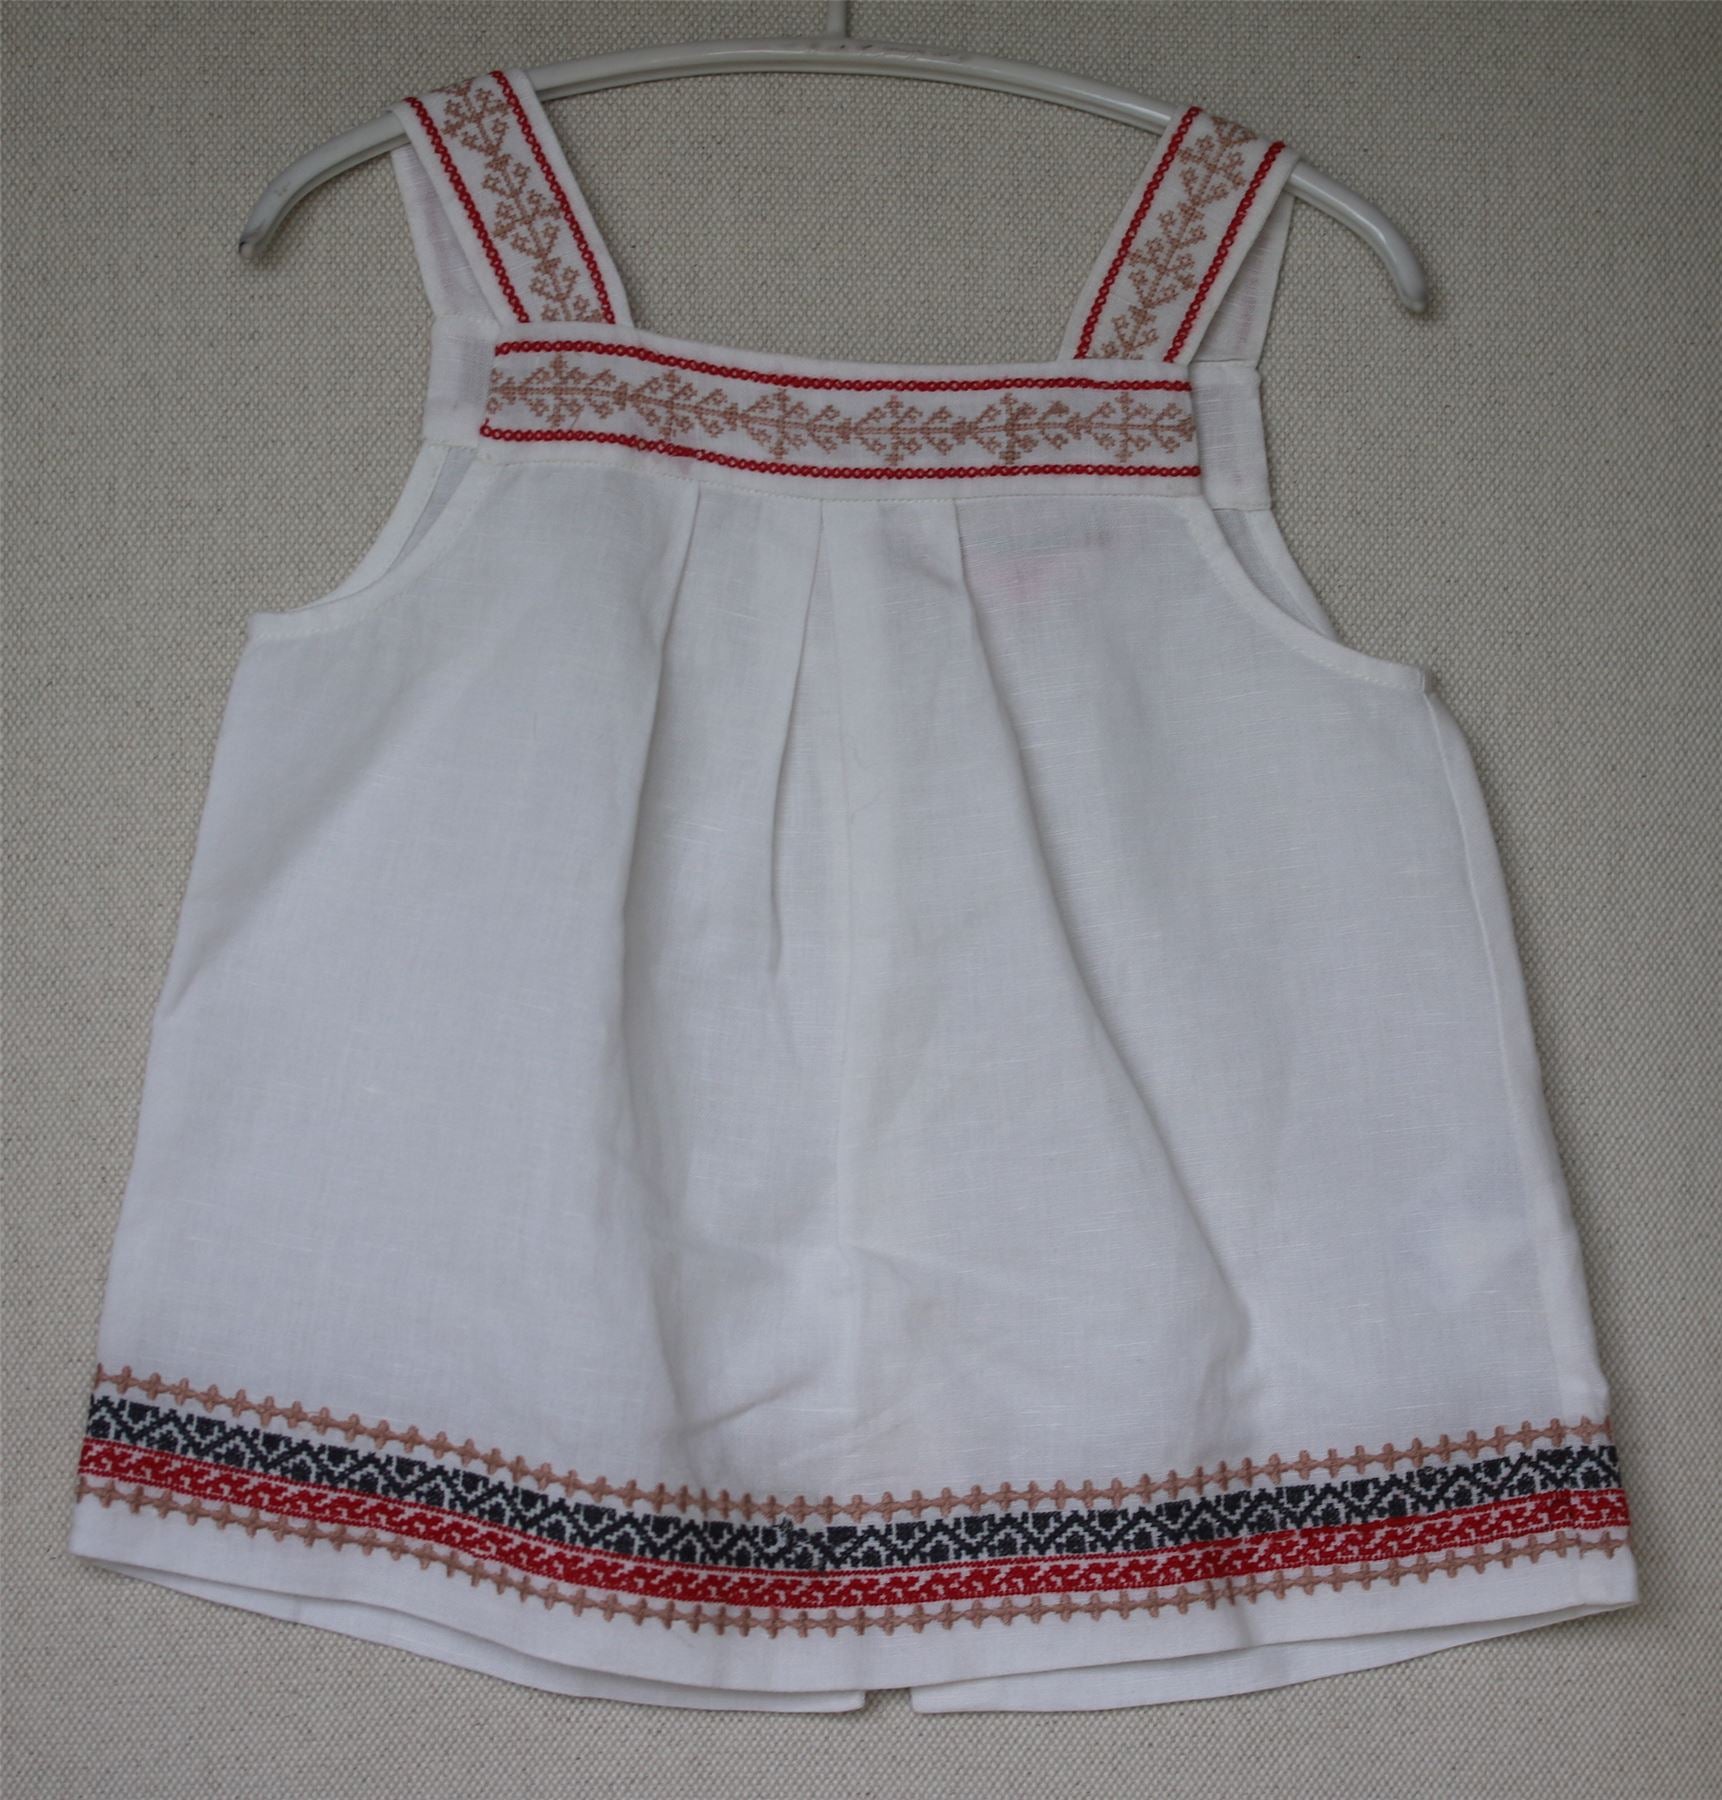 BONPOINT GIRLS WHITE EMBROIDERED SOLEIL TOP 4 YEARS